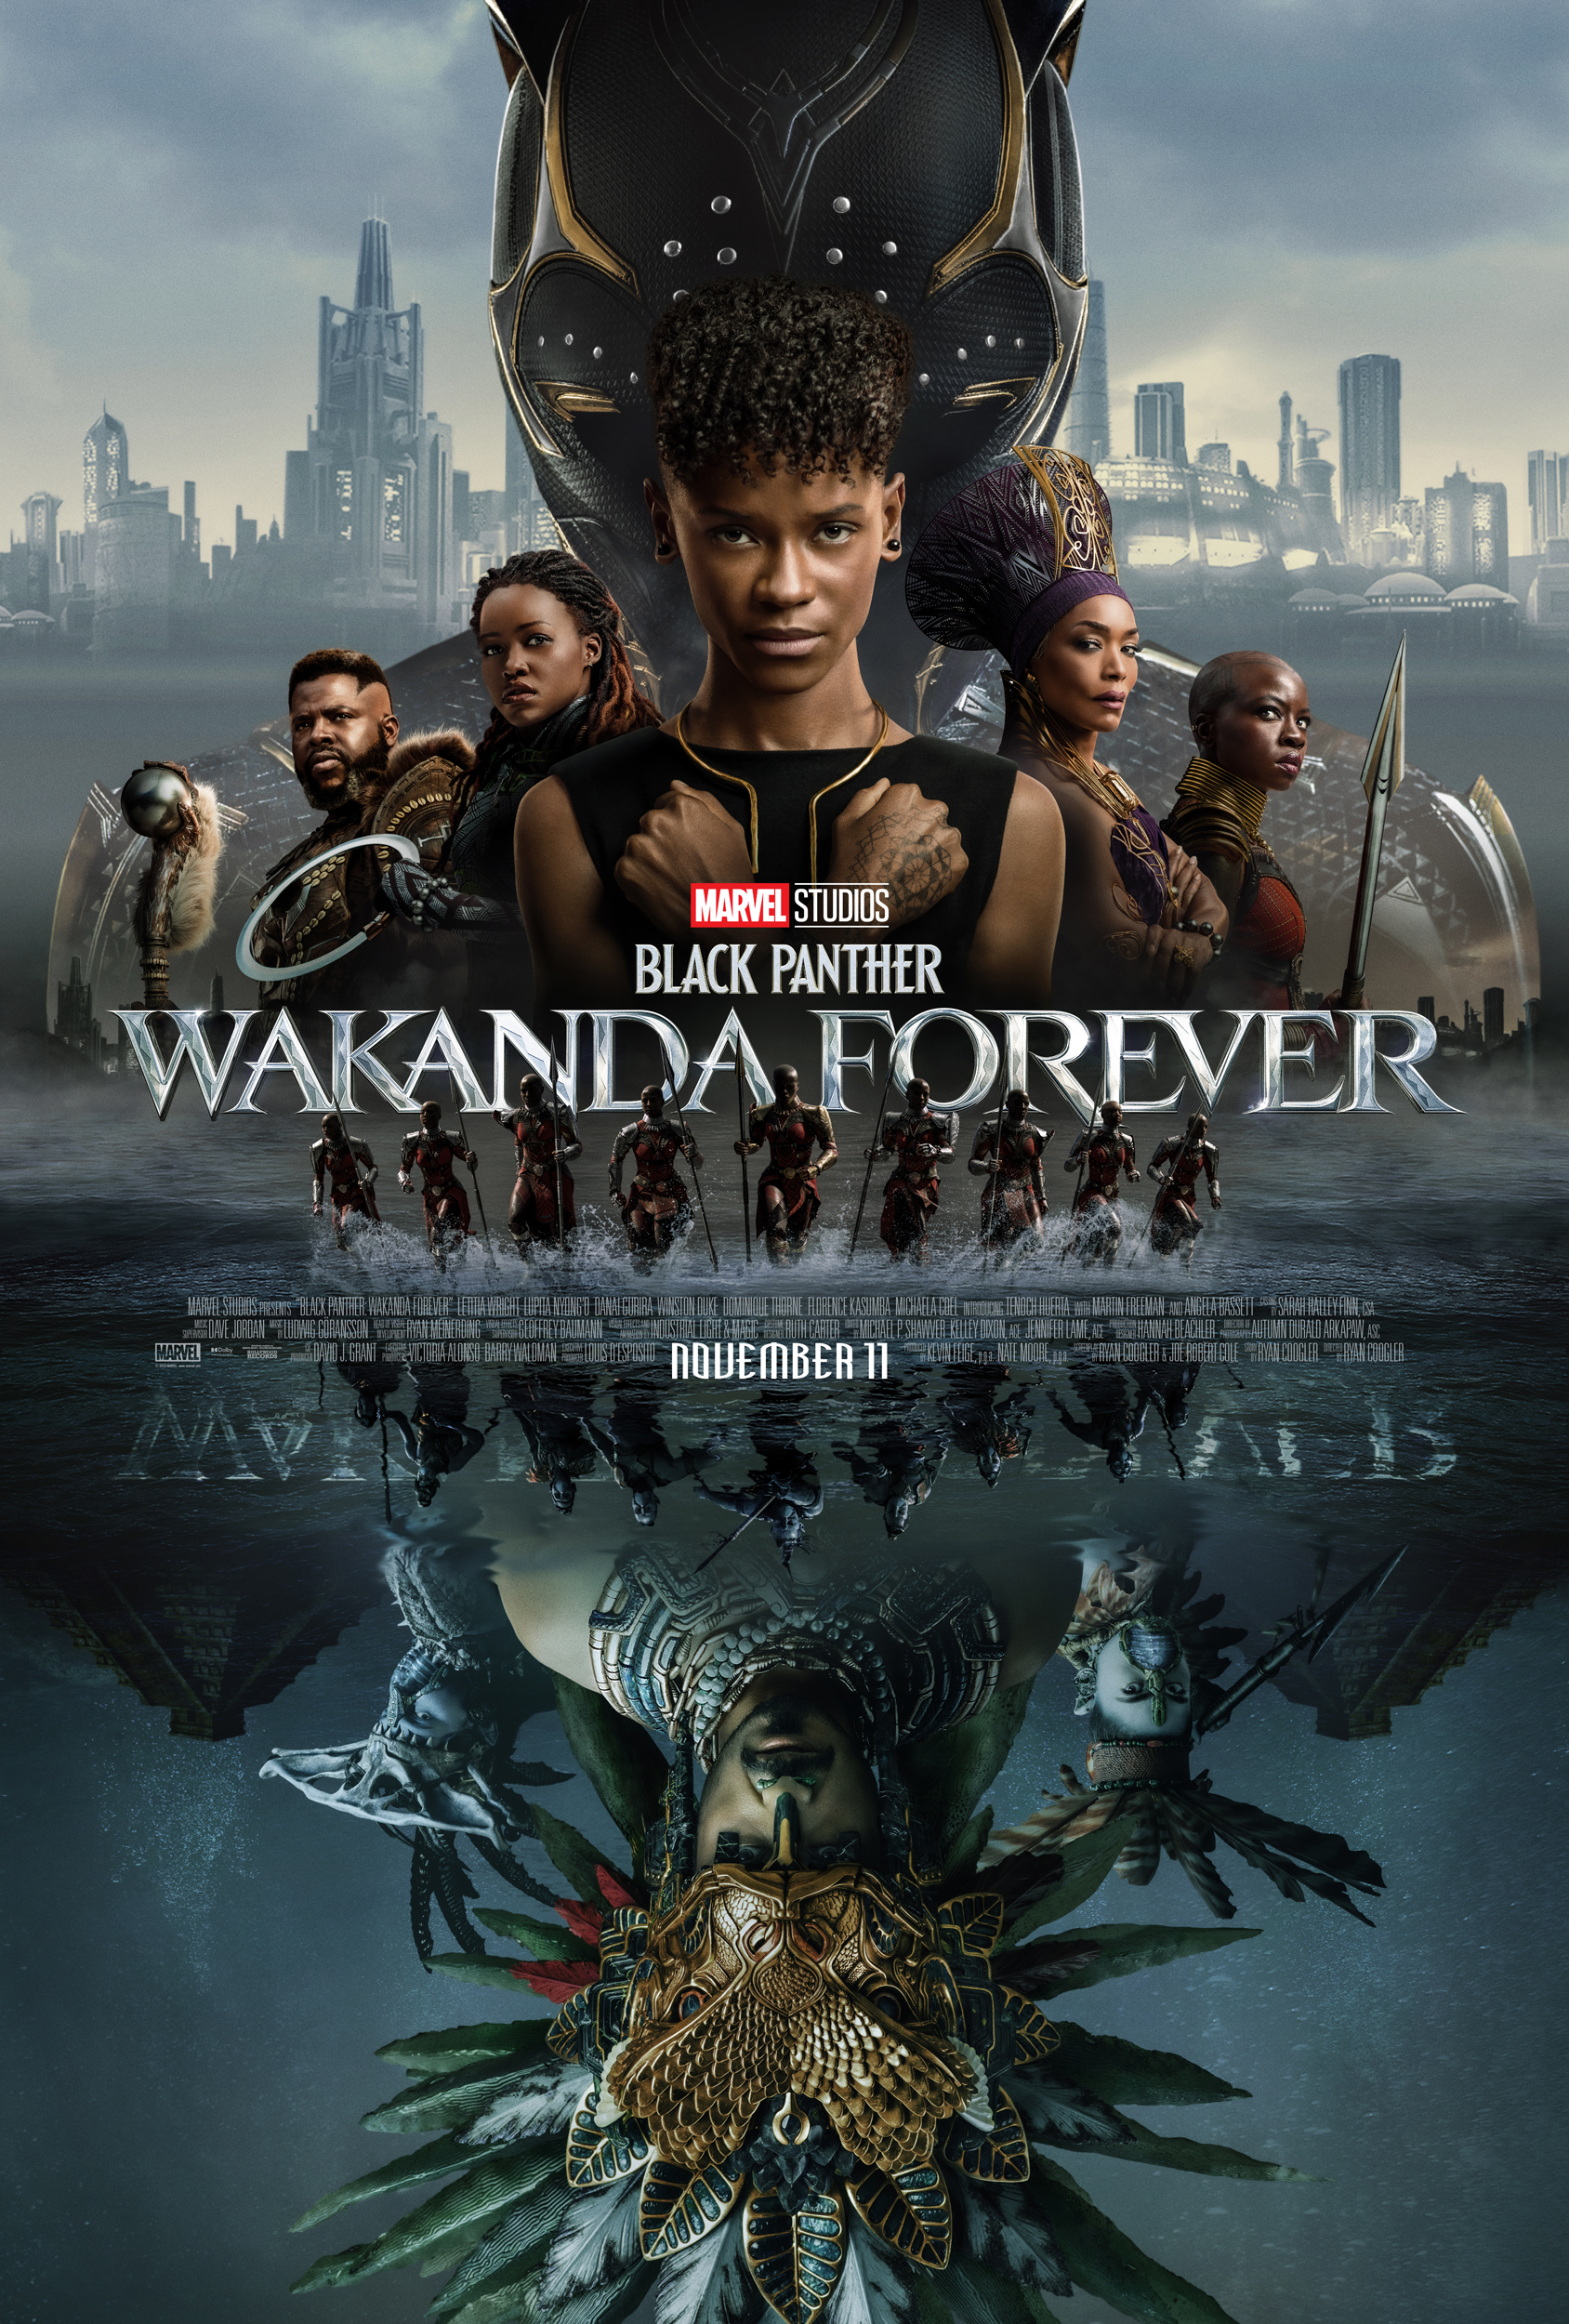 THE OFFICIAL NEW TRAILER & POSTER FOR MARVEL STUDIOS’ “BLACK PANTHER: WAKANDA FOREVER”